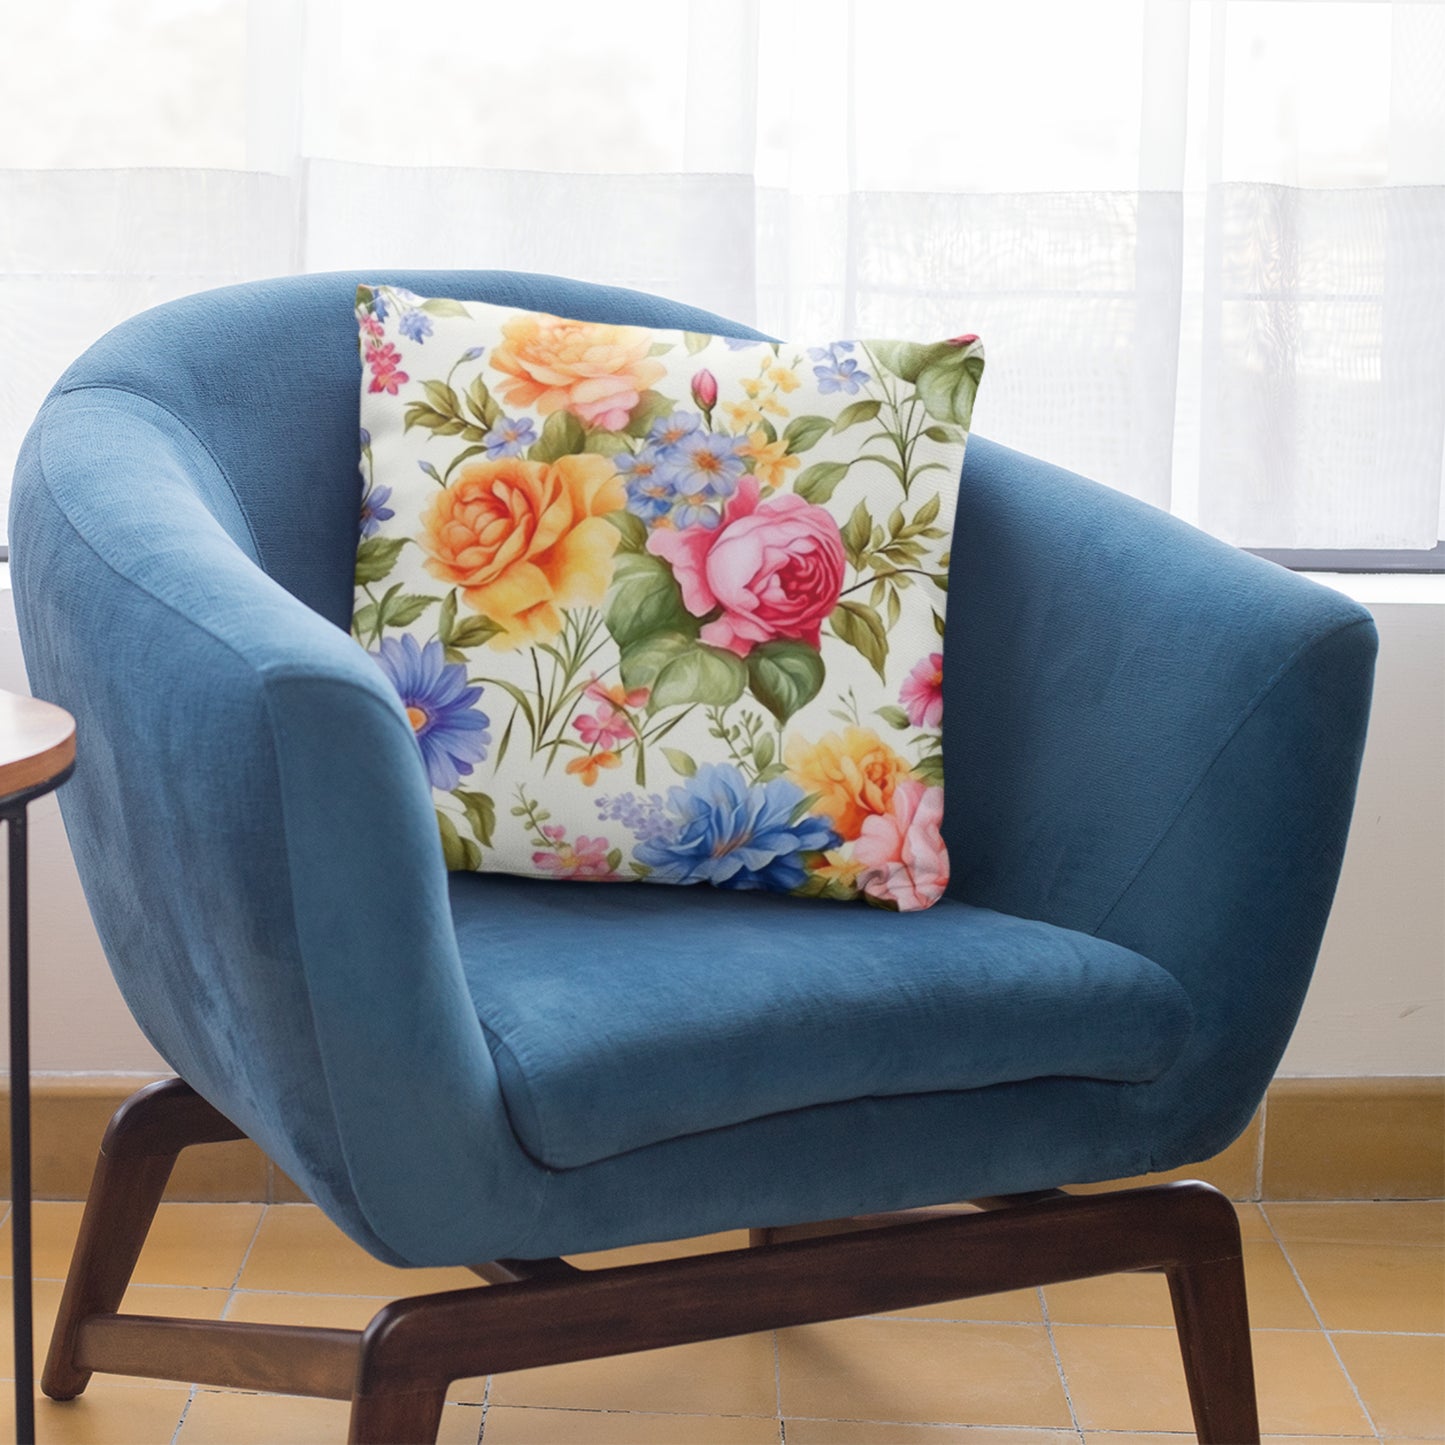 Whimsical Floral Decor Pillow